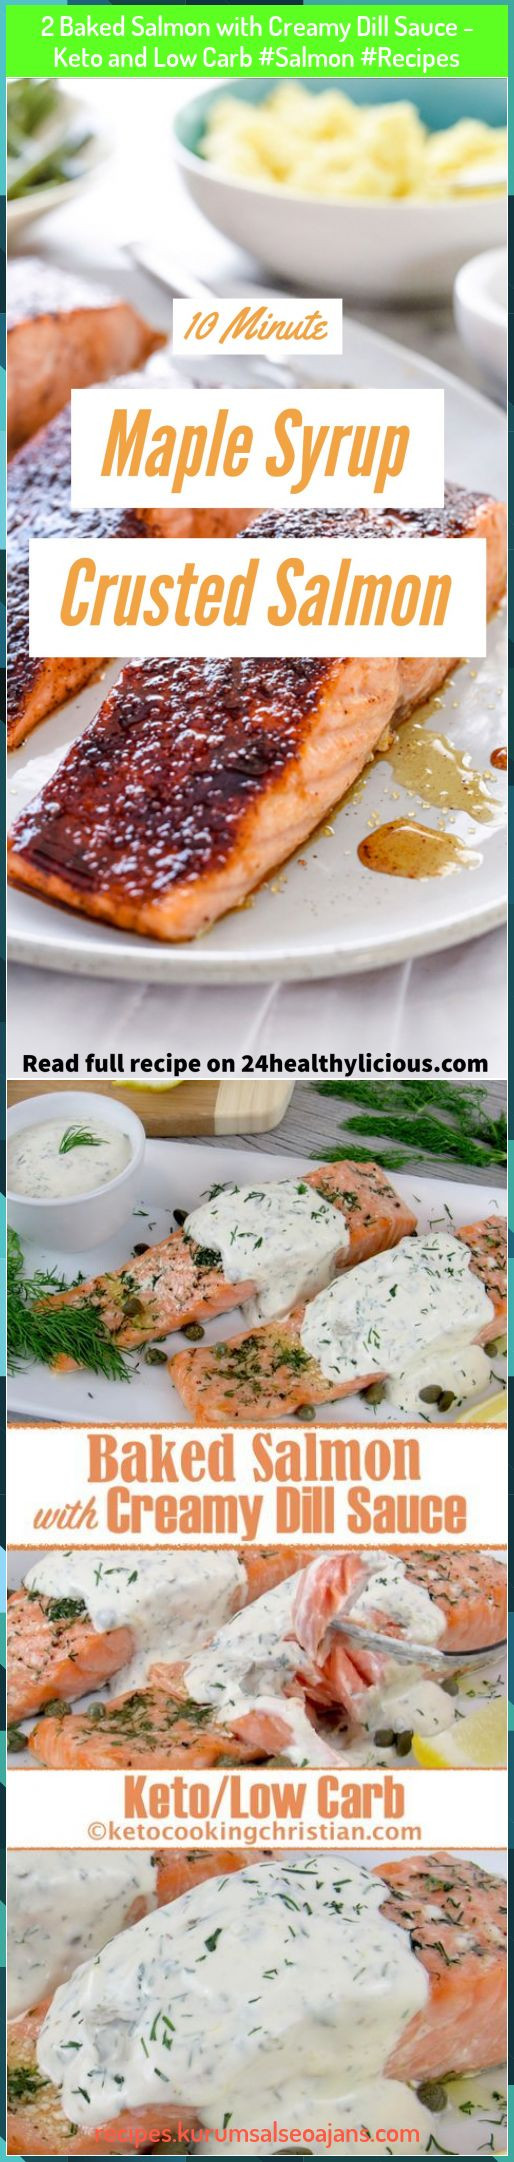 Baked Salmon Keto
 2 Baked Salmon with Creamy Dill Sauce Keto and Low Carb